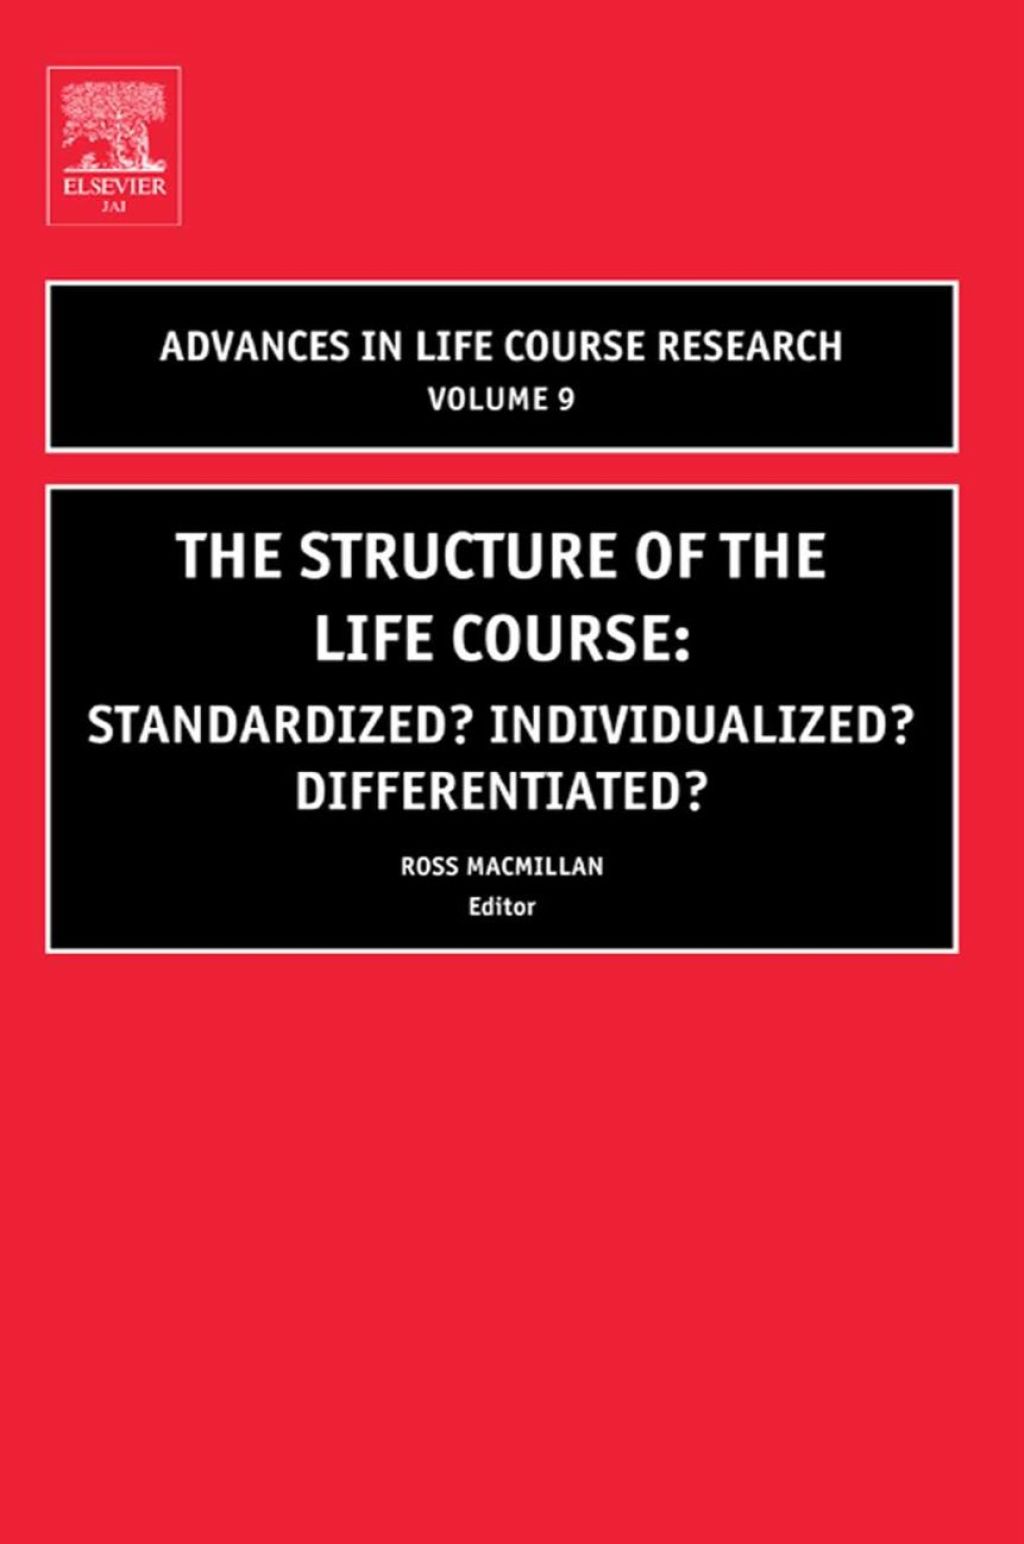 The Structure of the Life Course: Standardized? Individualized? Differentiated?: Standardized? Individualized? Differenti (eBook) - Macmillan;  Ross,